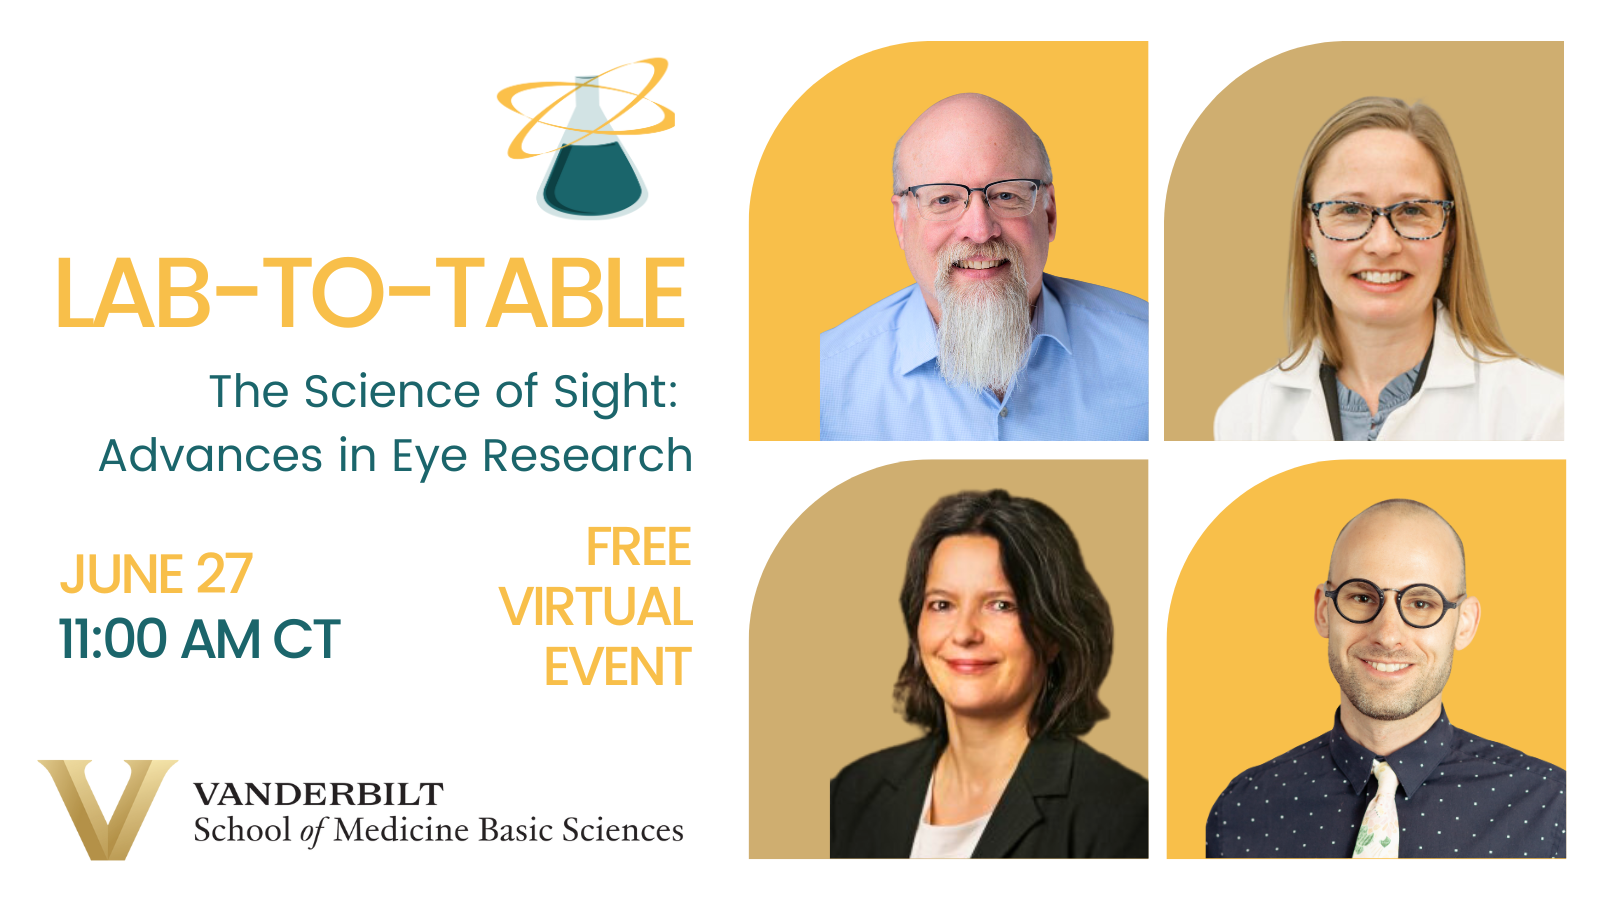 Lab-to-Table Conversation: ‘Science of Sight: Advances in Eye Research’ on June 27